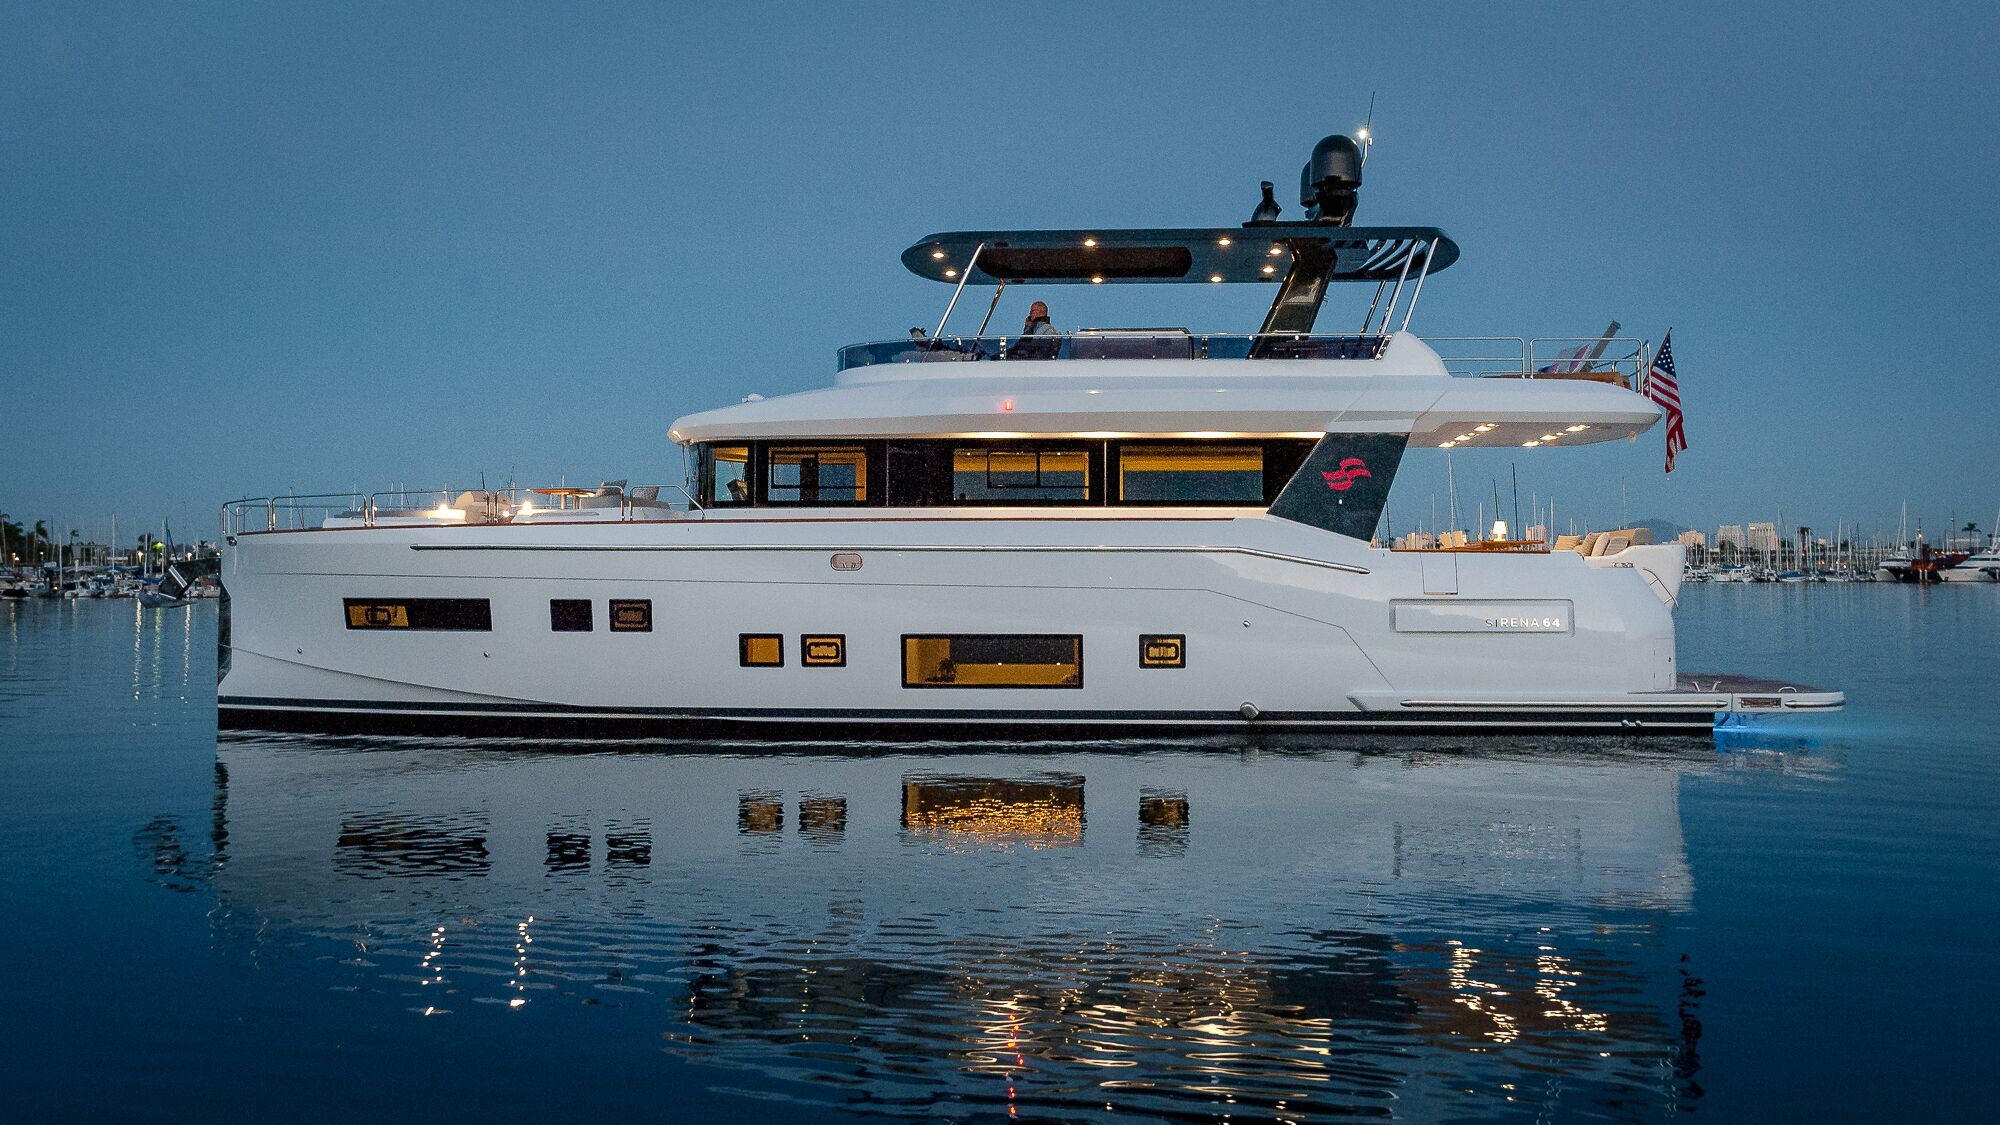 sirena 64 yacht for sale